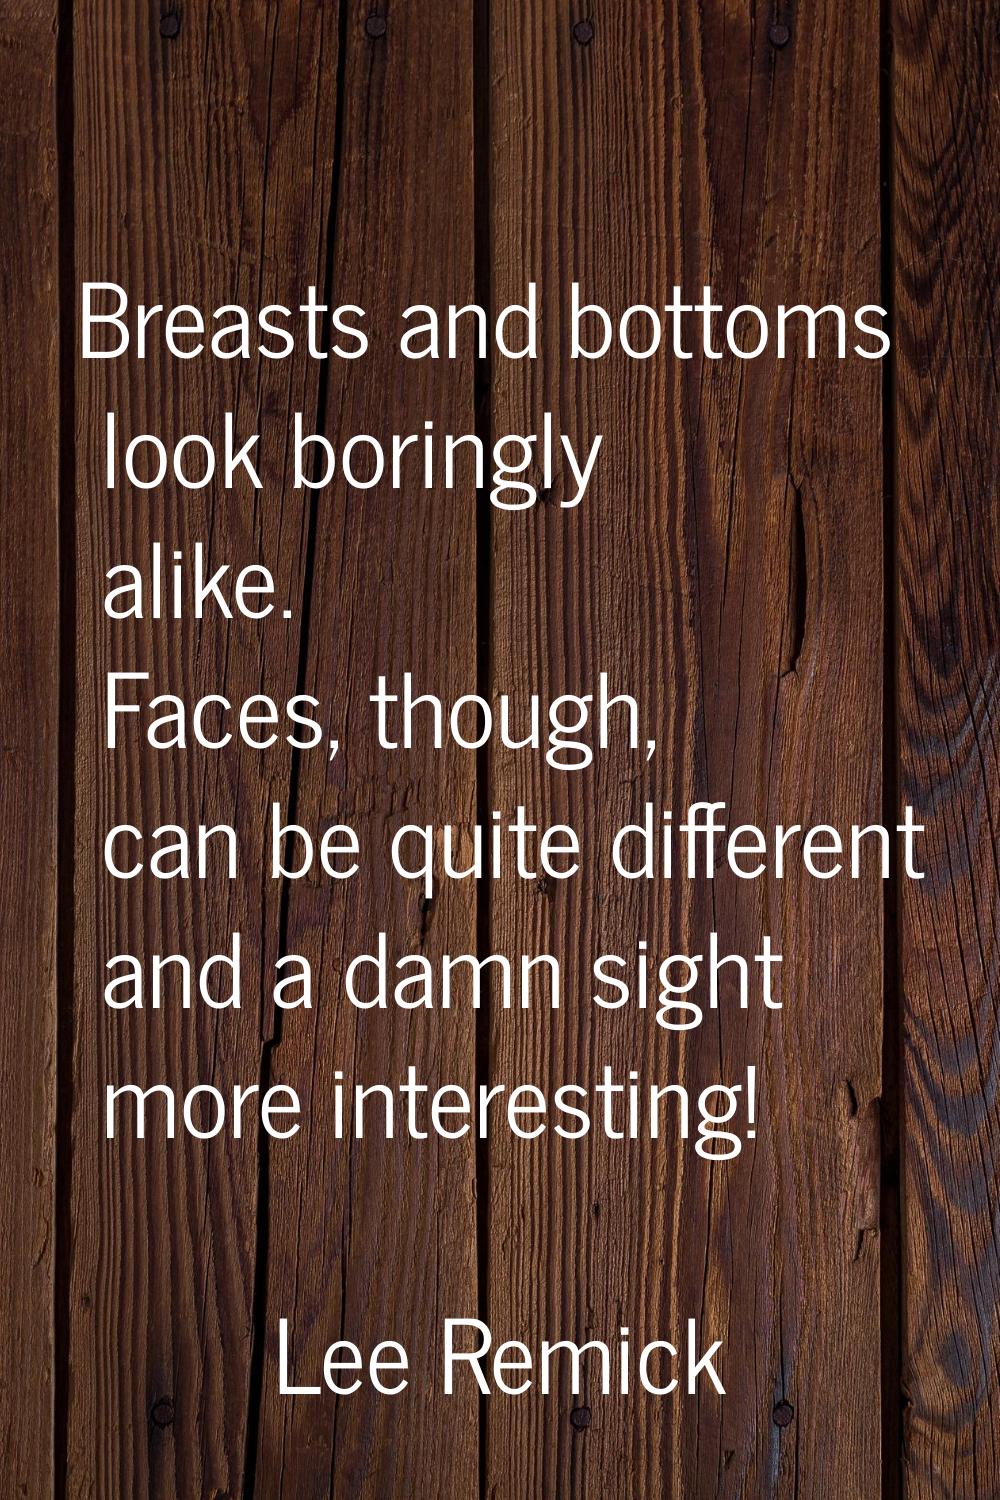 Breasts and bottoms look boringly alike. Faces, though, can be quite different and a damn sight mor